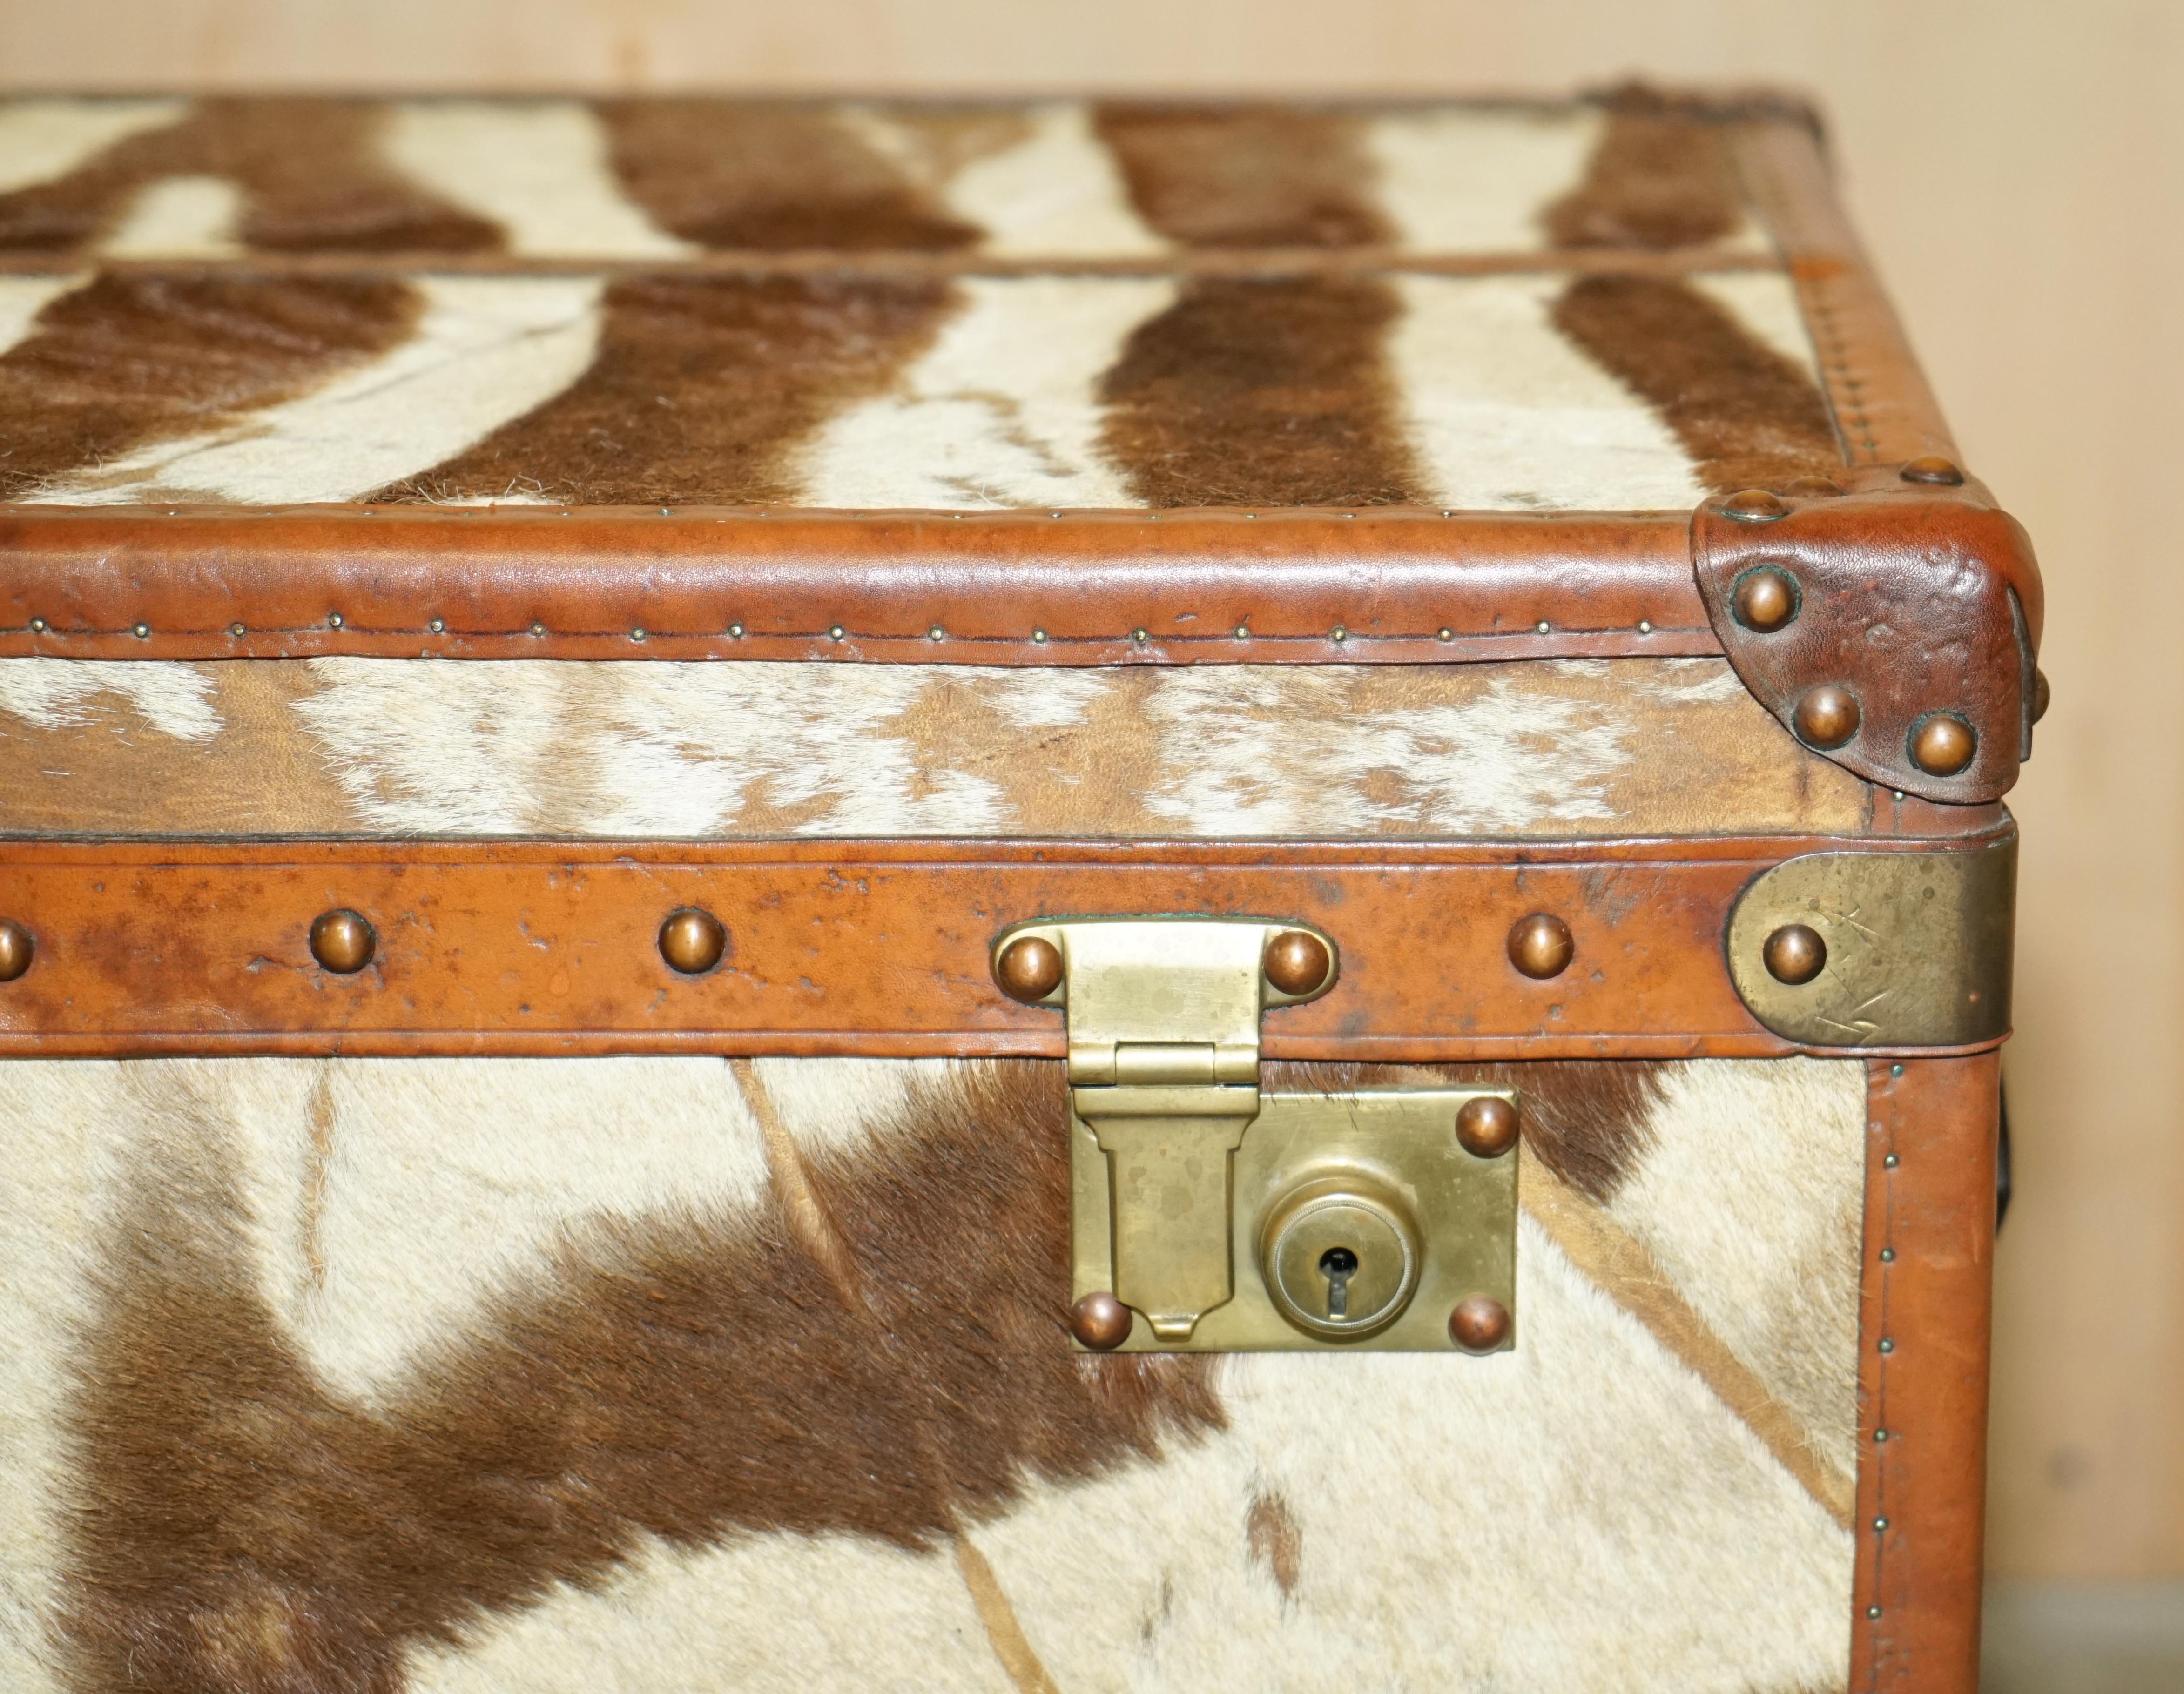 Early 20th Century PAiR OF ANTIQUE ZEBRA SKIN & LEATHER UPHOLSTERED STEAMER TRUNKS CHESTS TABLES